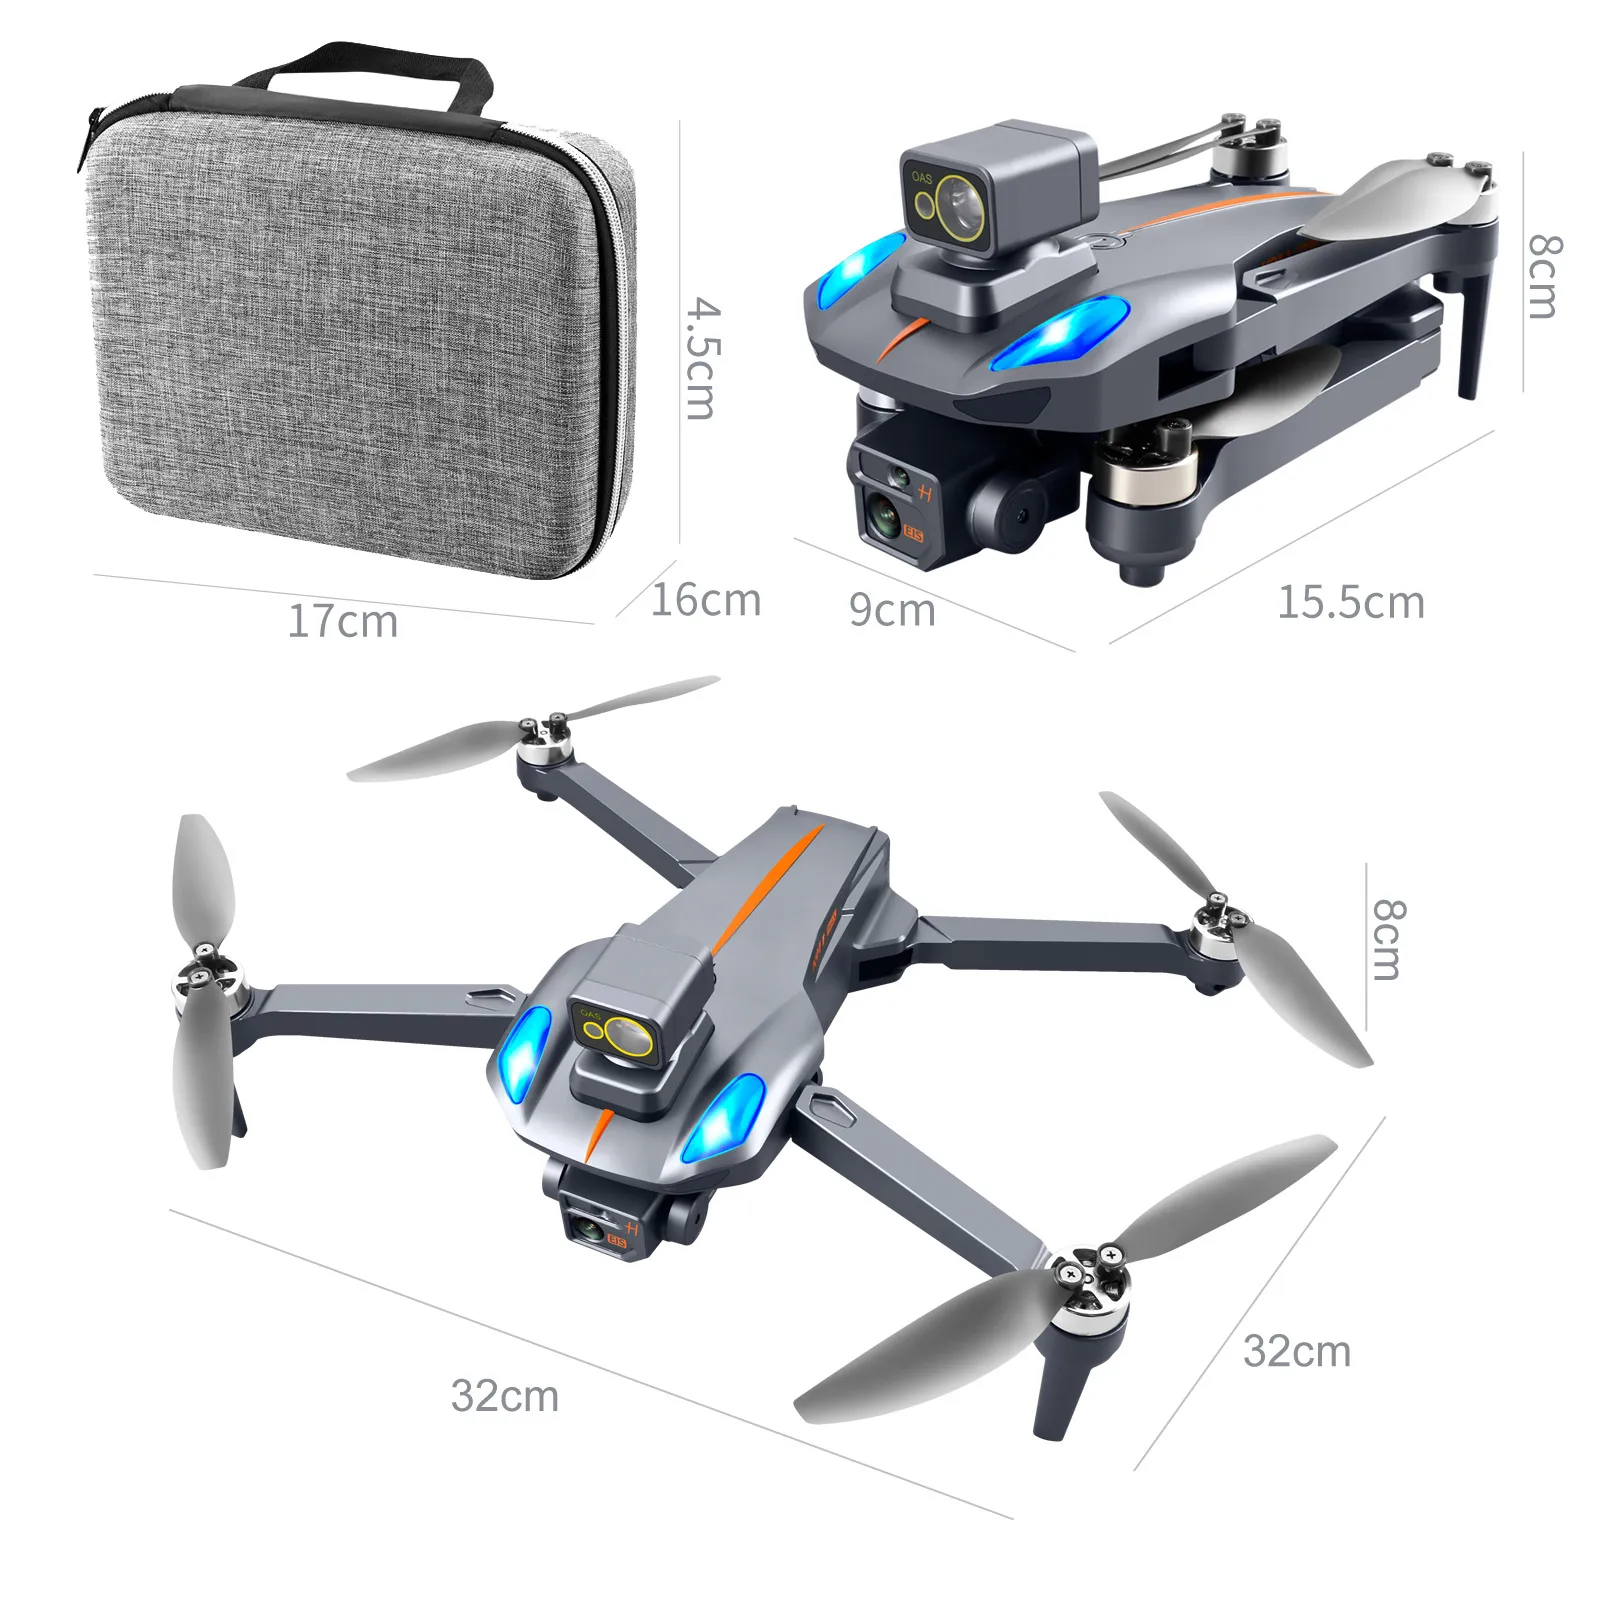 K911 MAX GPS Drone 4K Professional Obstacle Avoidance 8K Dual HD Camera Brushless Motor Foldable Quadcopter RC Distance 1200M syma remote control